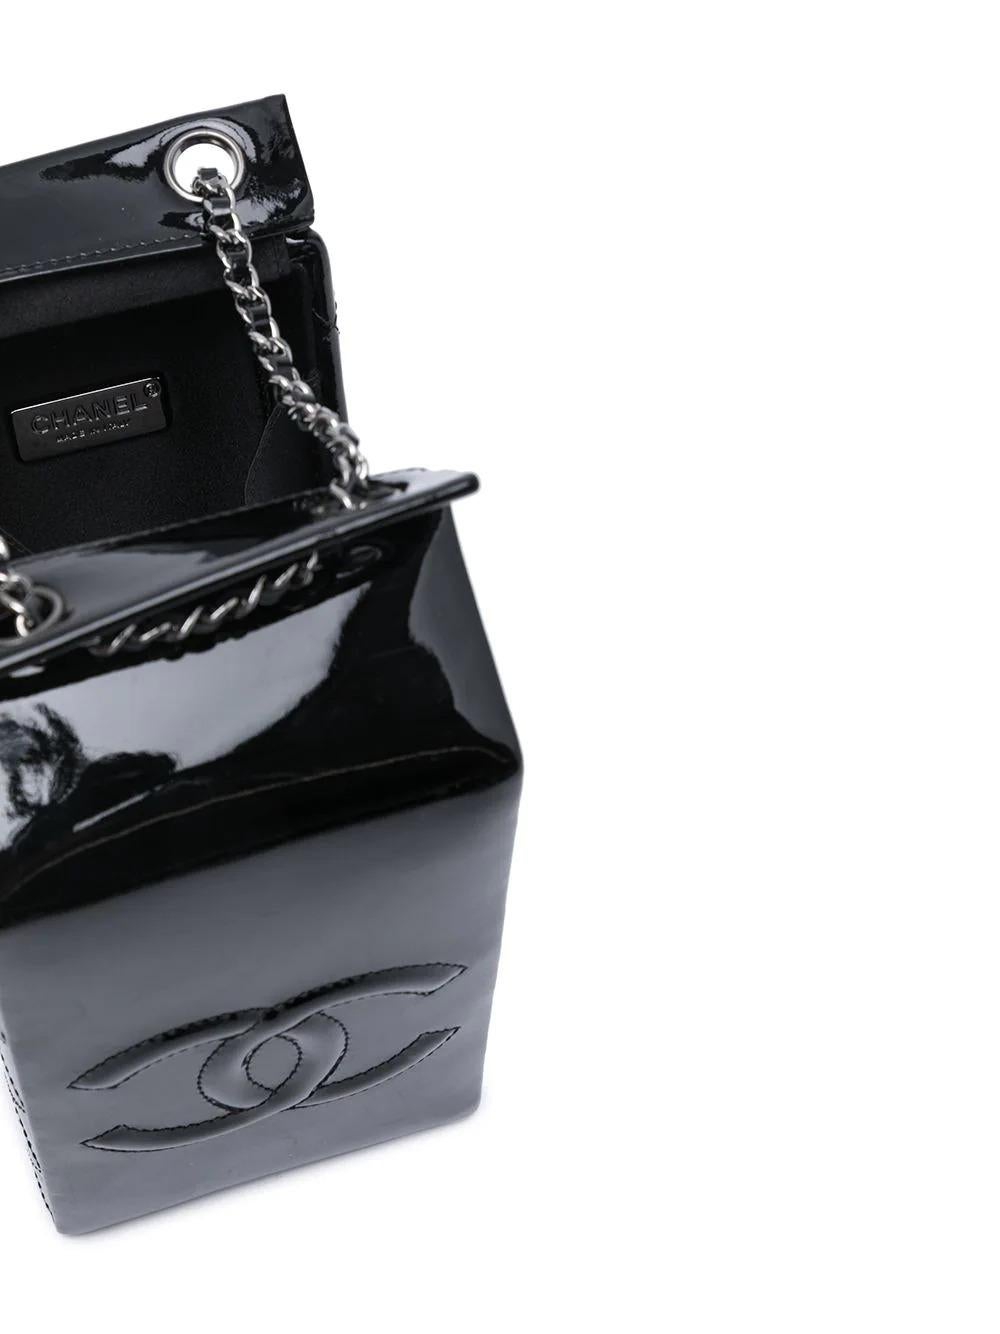 Got milk? This limited edition Chanel milk carton bag derives from one of Karl Lagerfeld's most infamous runway stagings of all time, the supermarket emporium of Autumn/Winter 2014. Its iridescent black leather is detailed with quilted side panels,